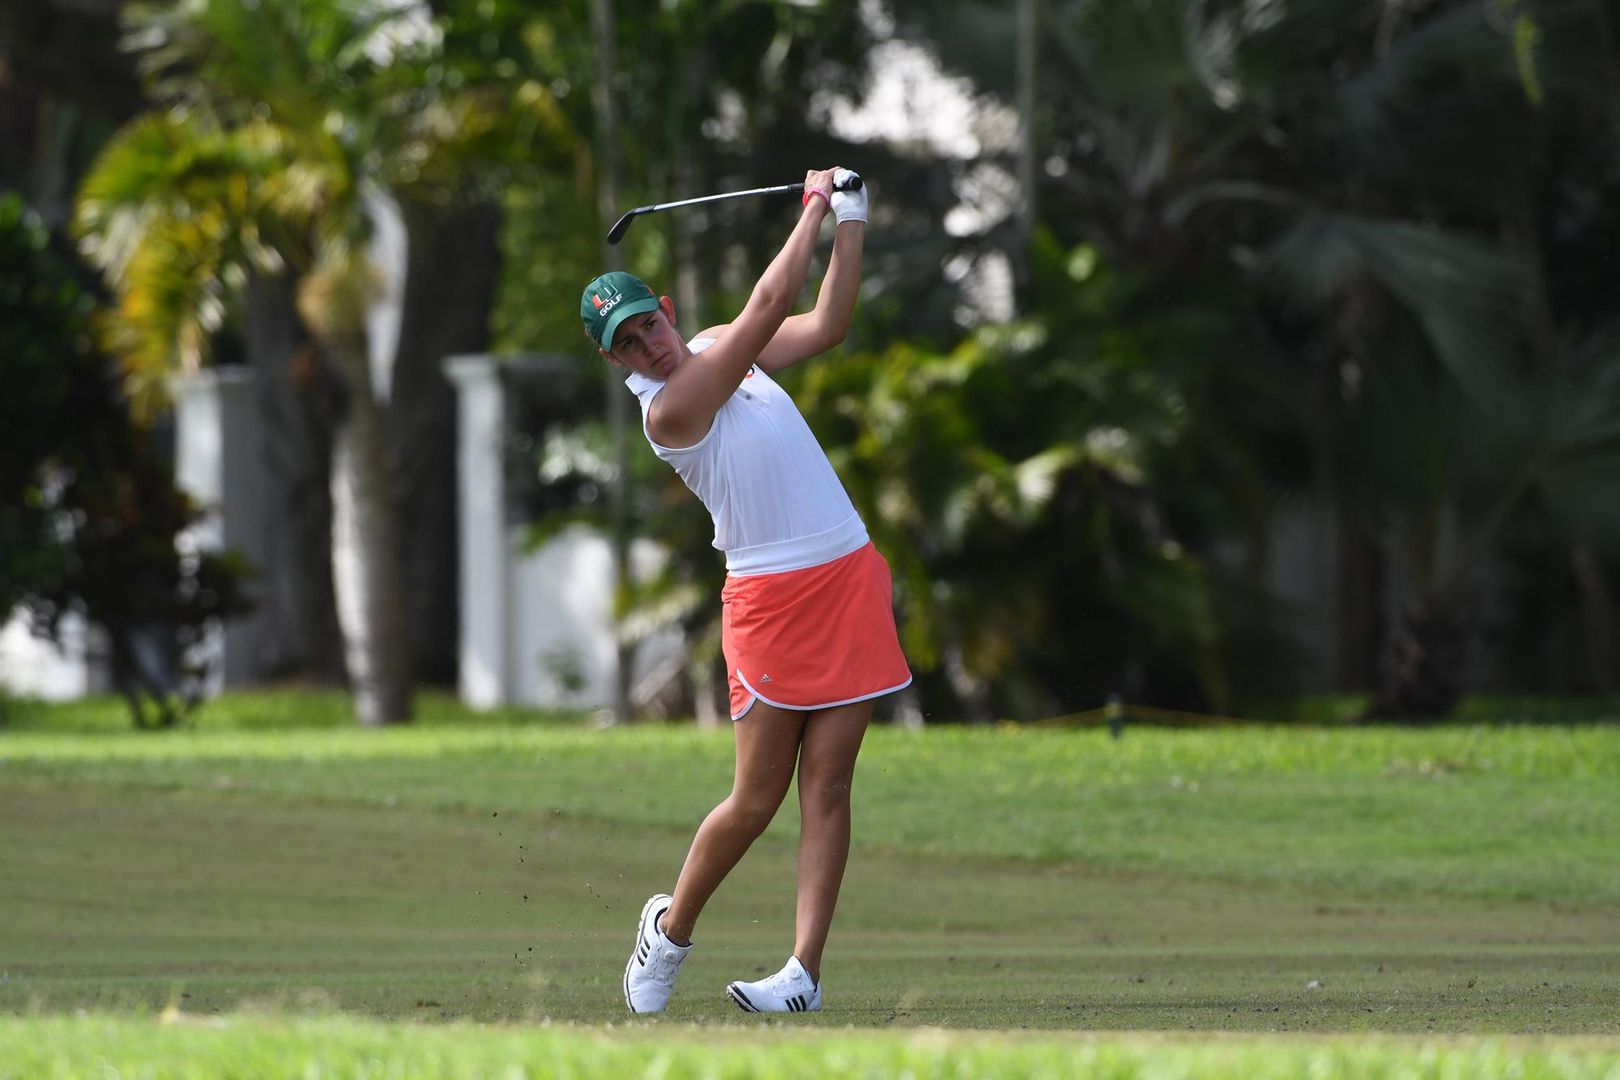 Canes in Ninth Place at Schooner Fall Classic